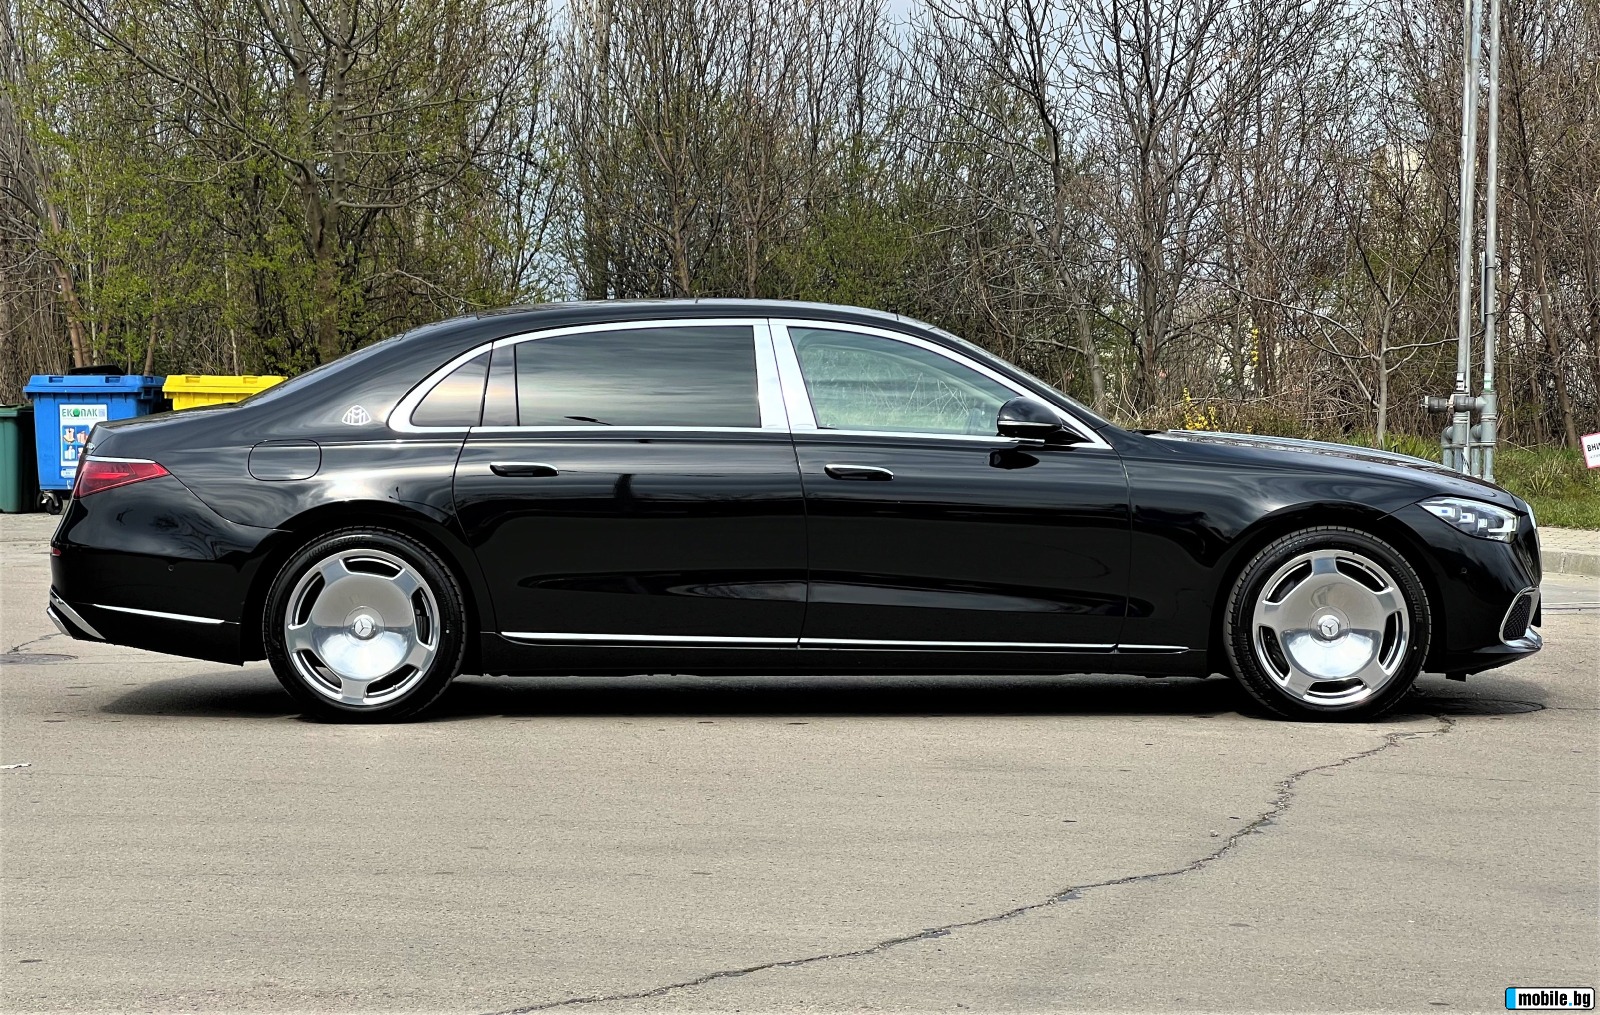 Mercedes-Benz S580 MAYBACH/ 4M/ DESIGNO/ EXCLUSIVE/ FIRST CLASS/ 20/  | Mobile.bg   7